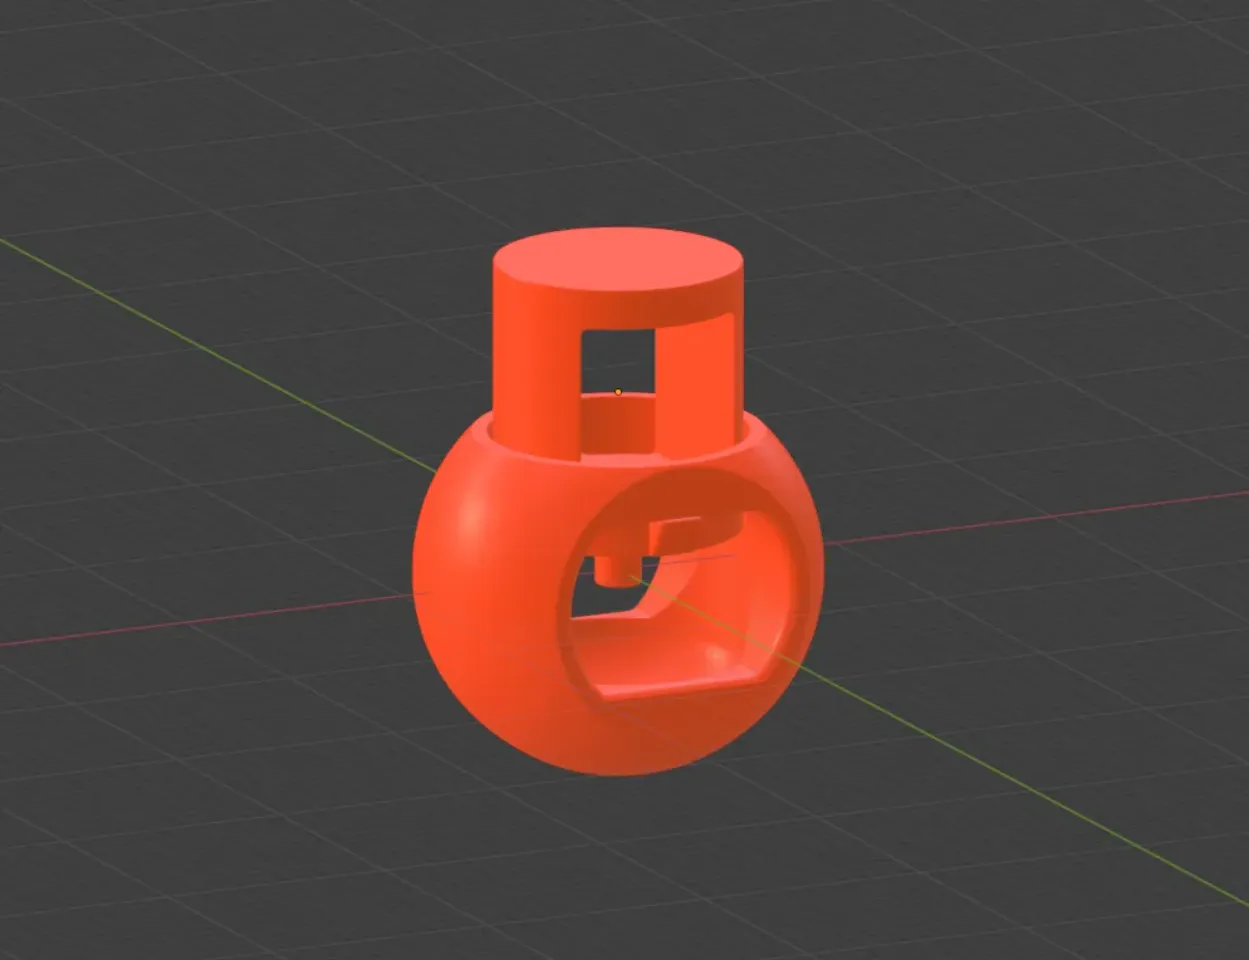 Generic Spherical Cord Lock / Cord Stopper / Drawstring Toggle by Jan Tuts, Download free STL model